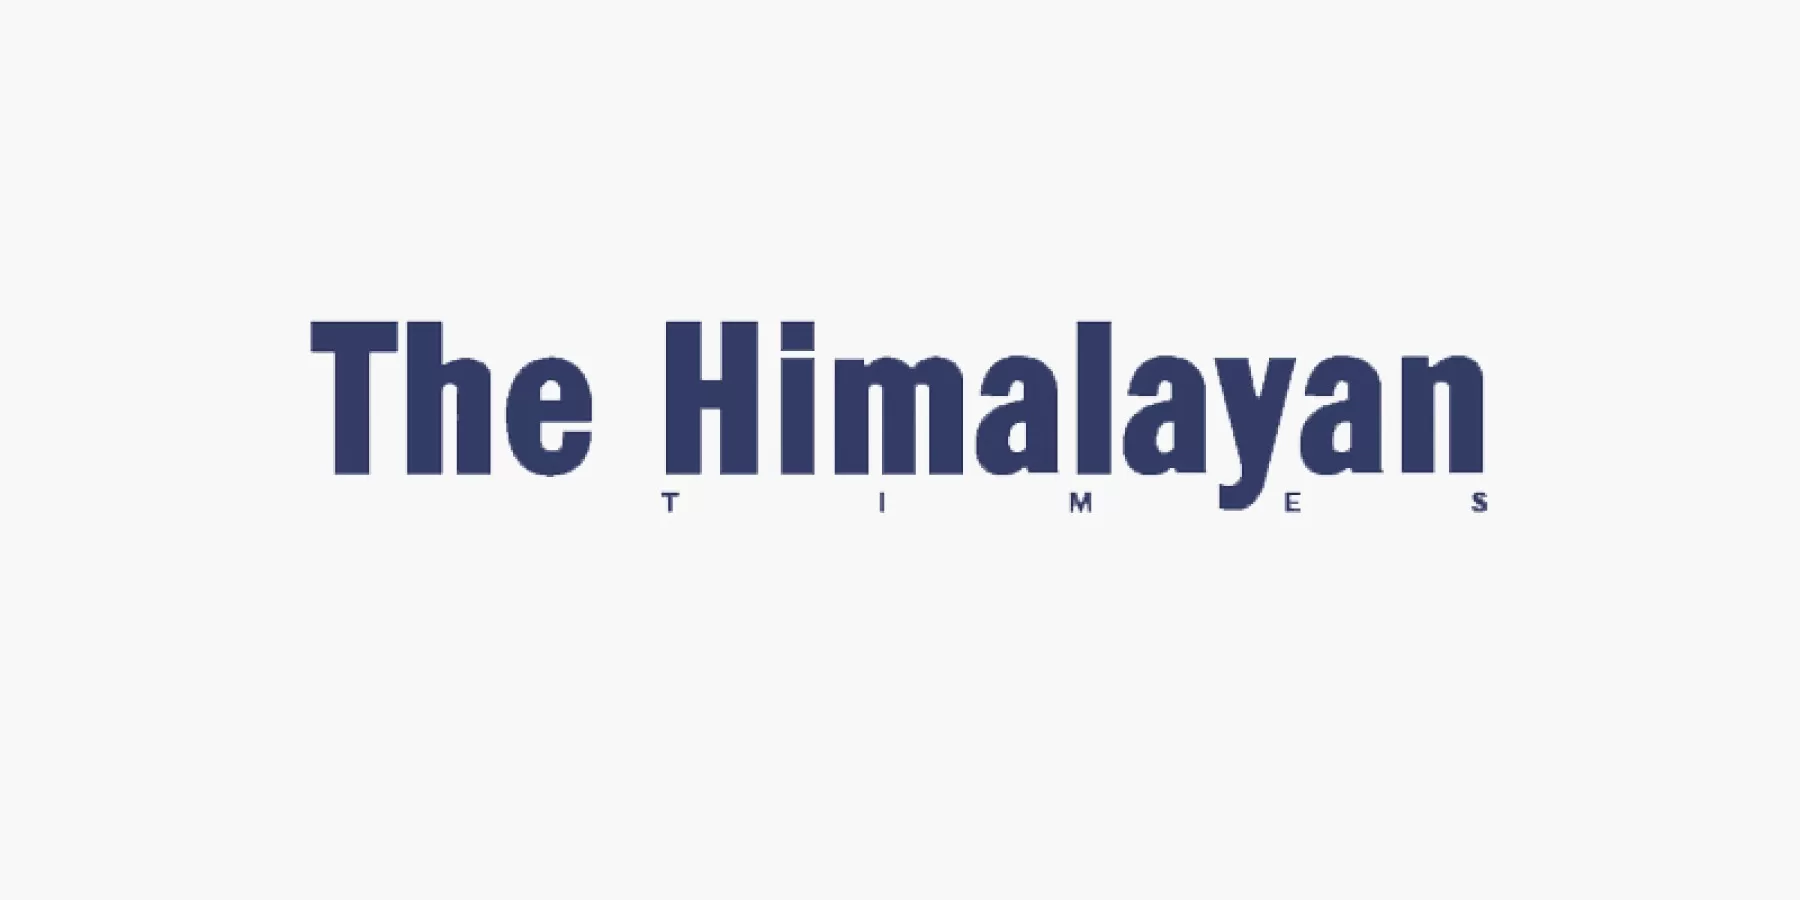 Newspaper Media The Himalayan Times Advertising in Nepal